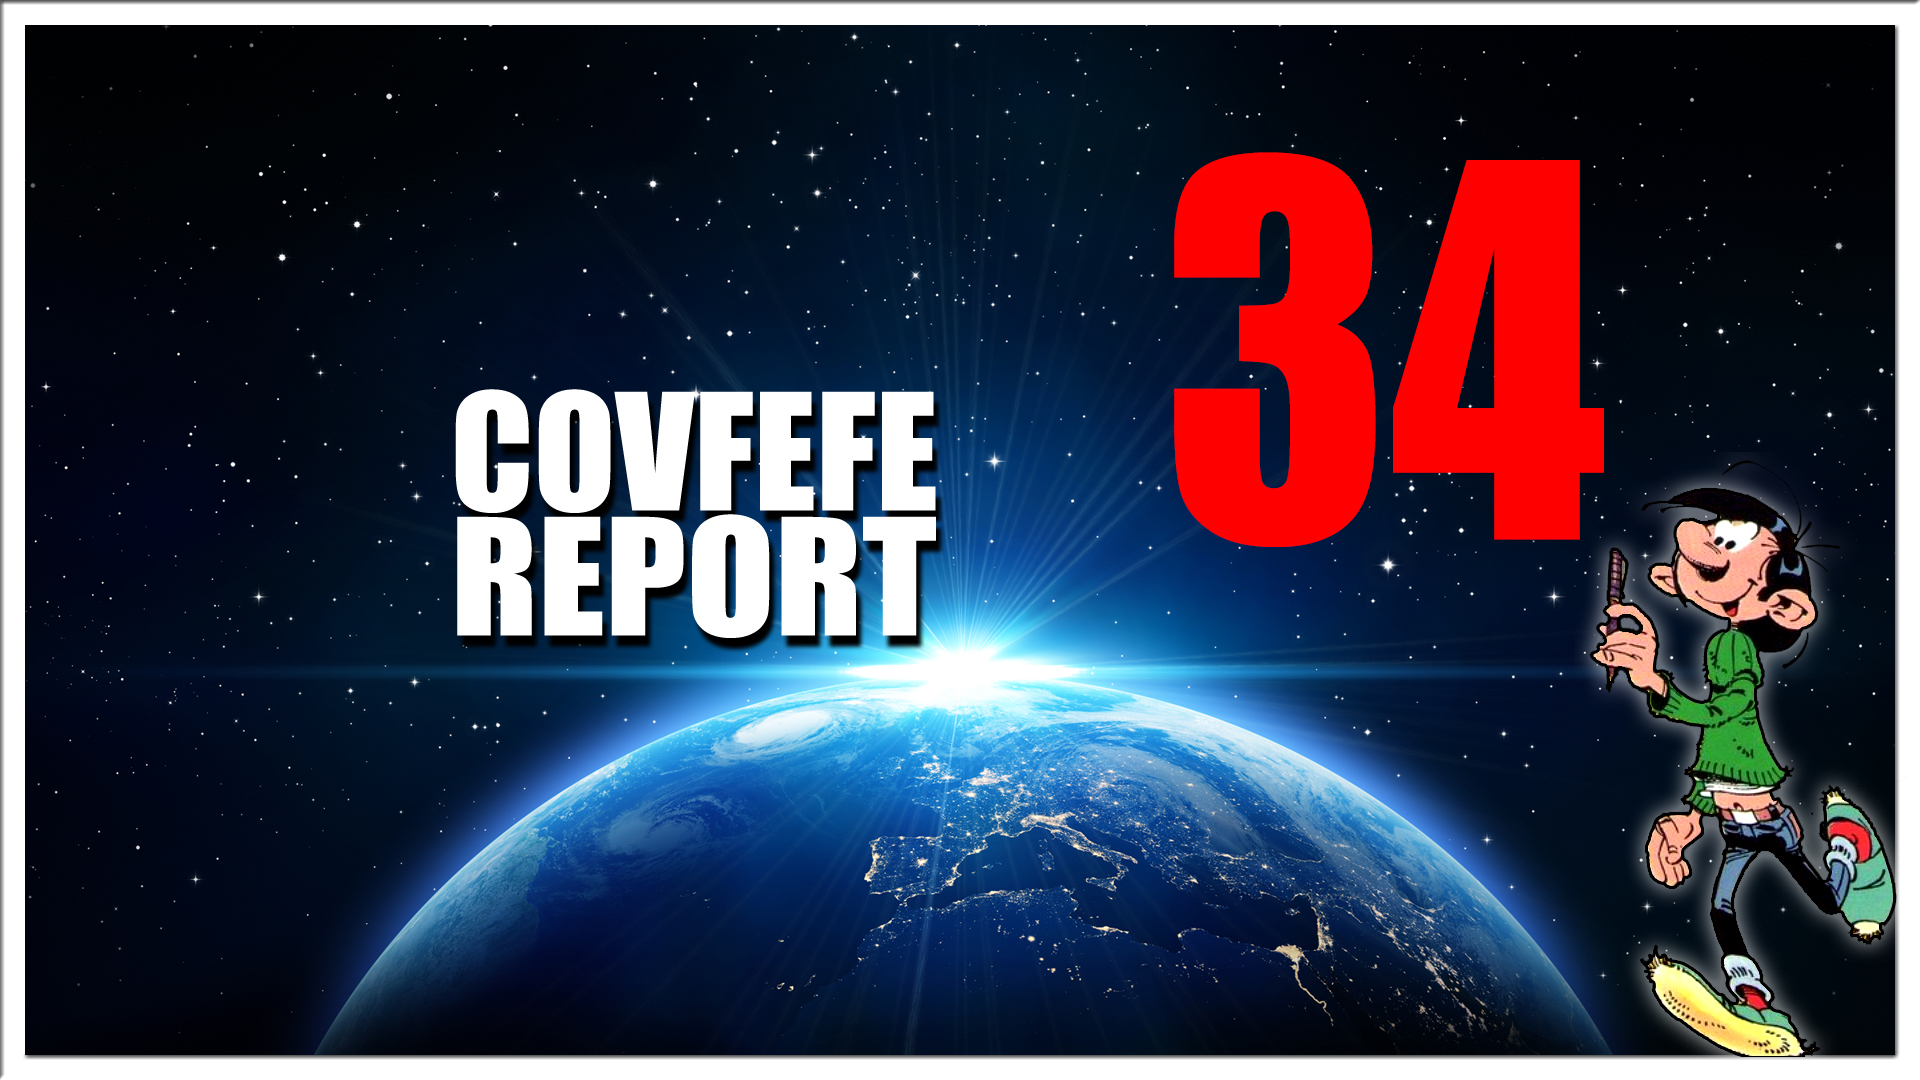 Covfefe Report 34. Rachel Maddow, Boots, All this for a damn flag